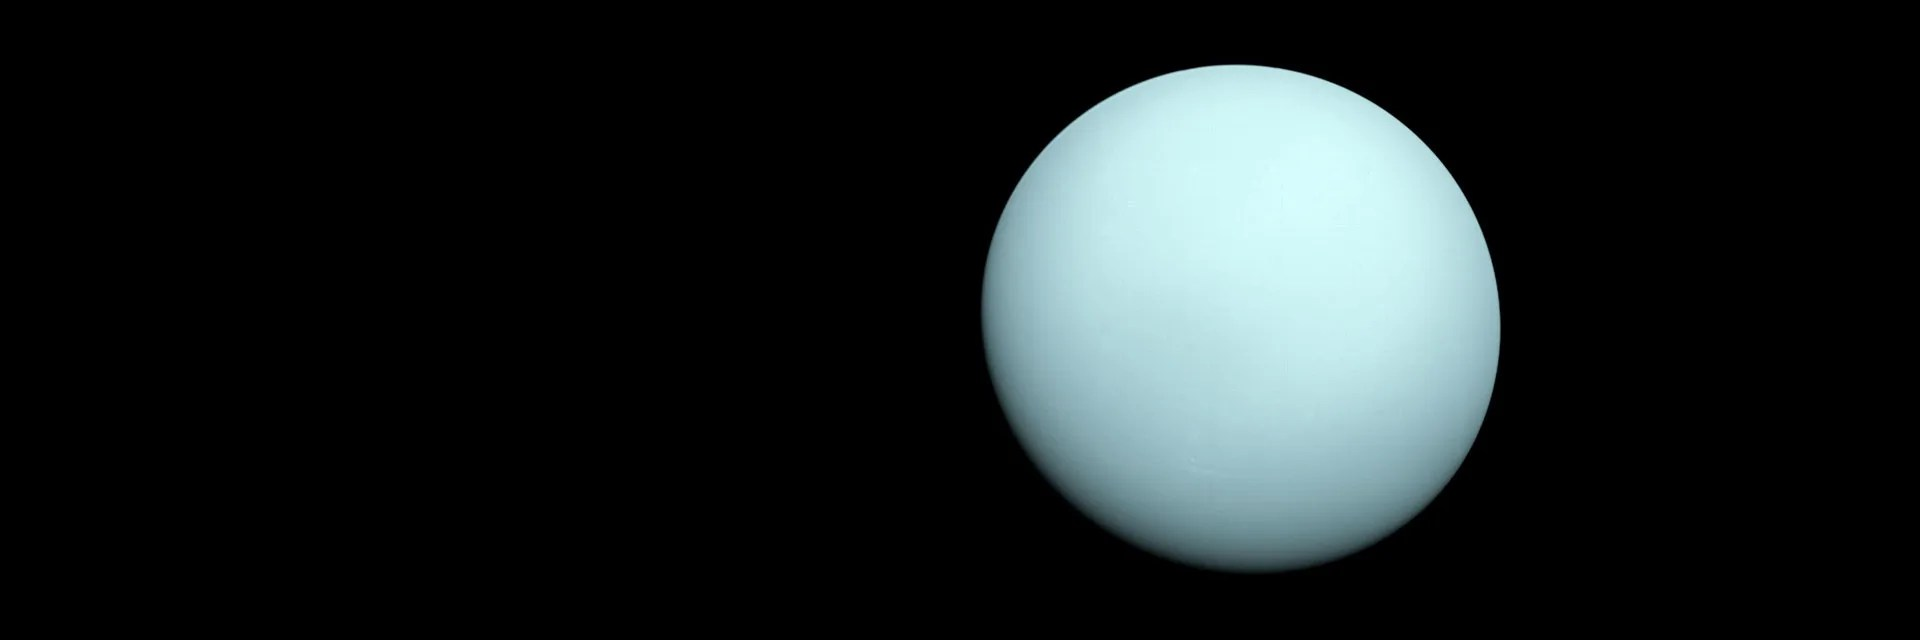 A full disk view of Uranus against the darkness of space.